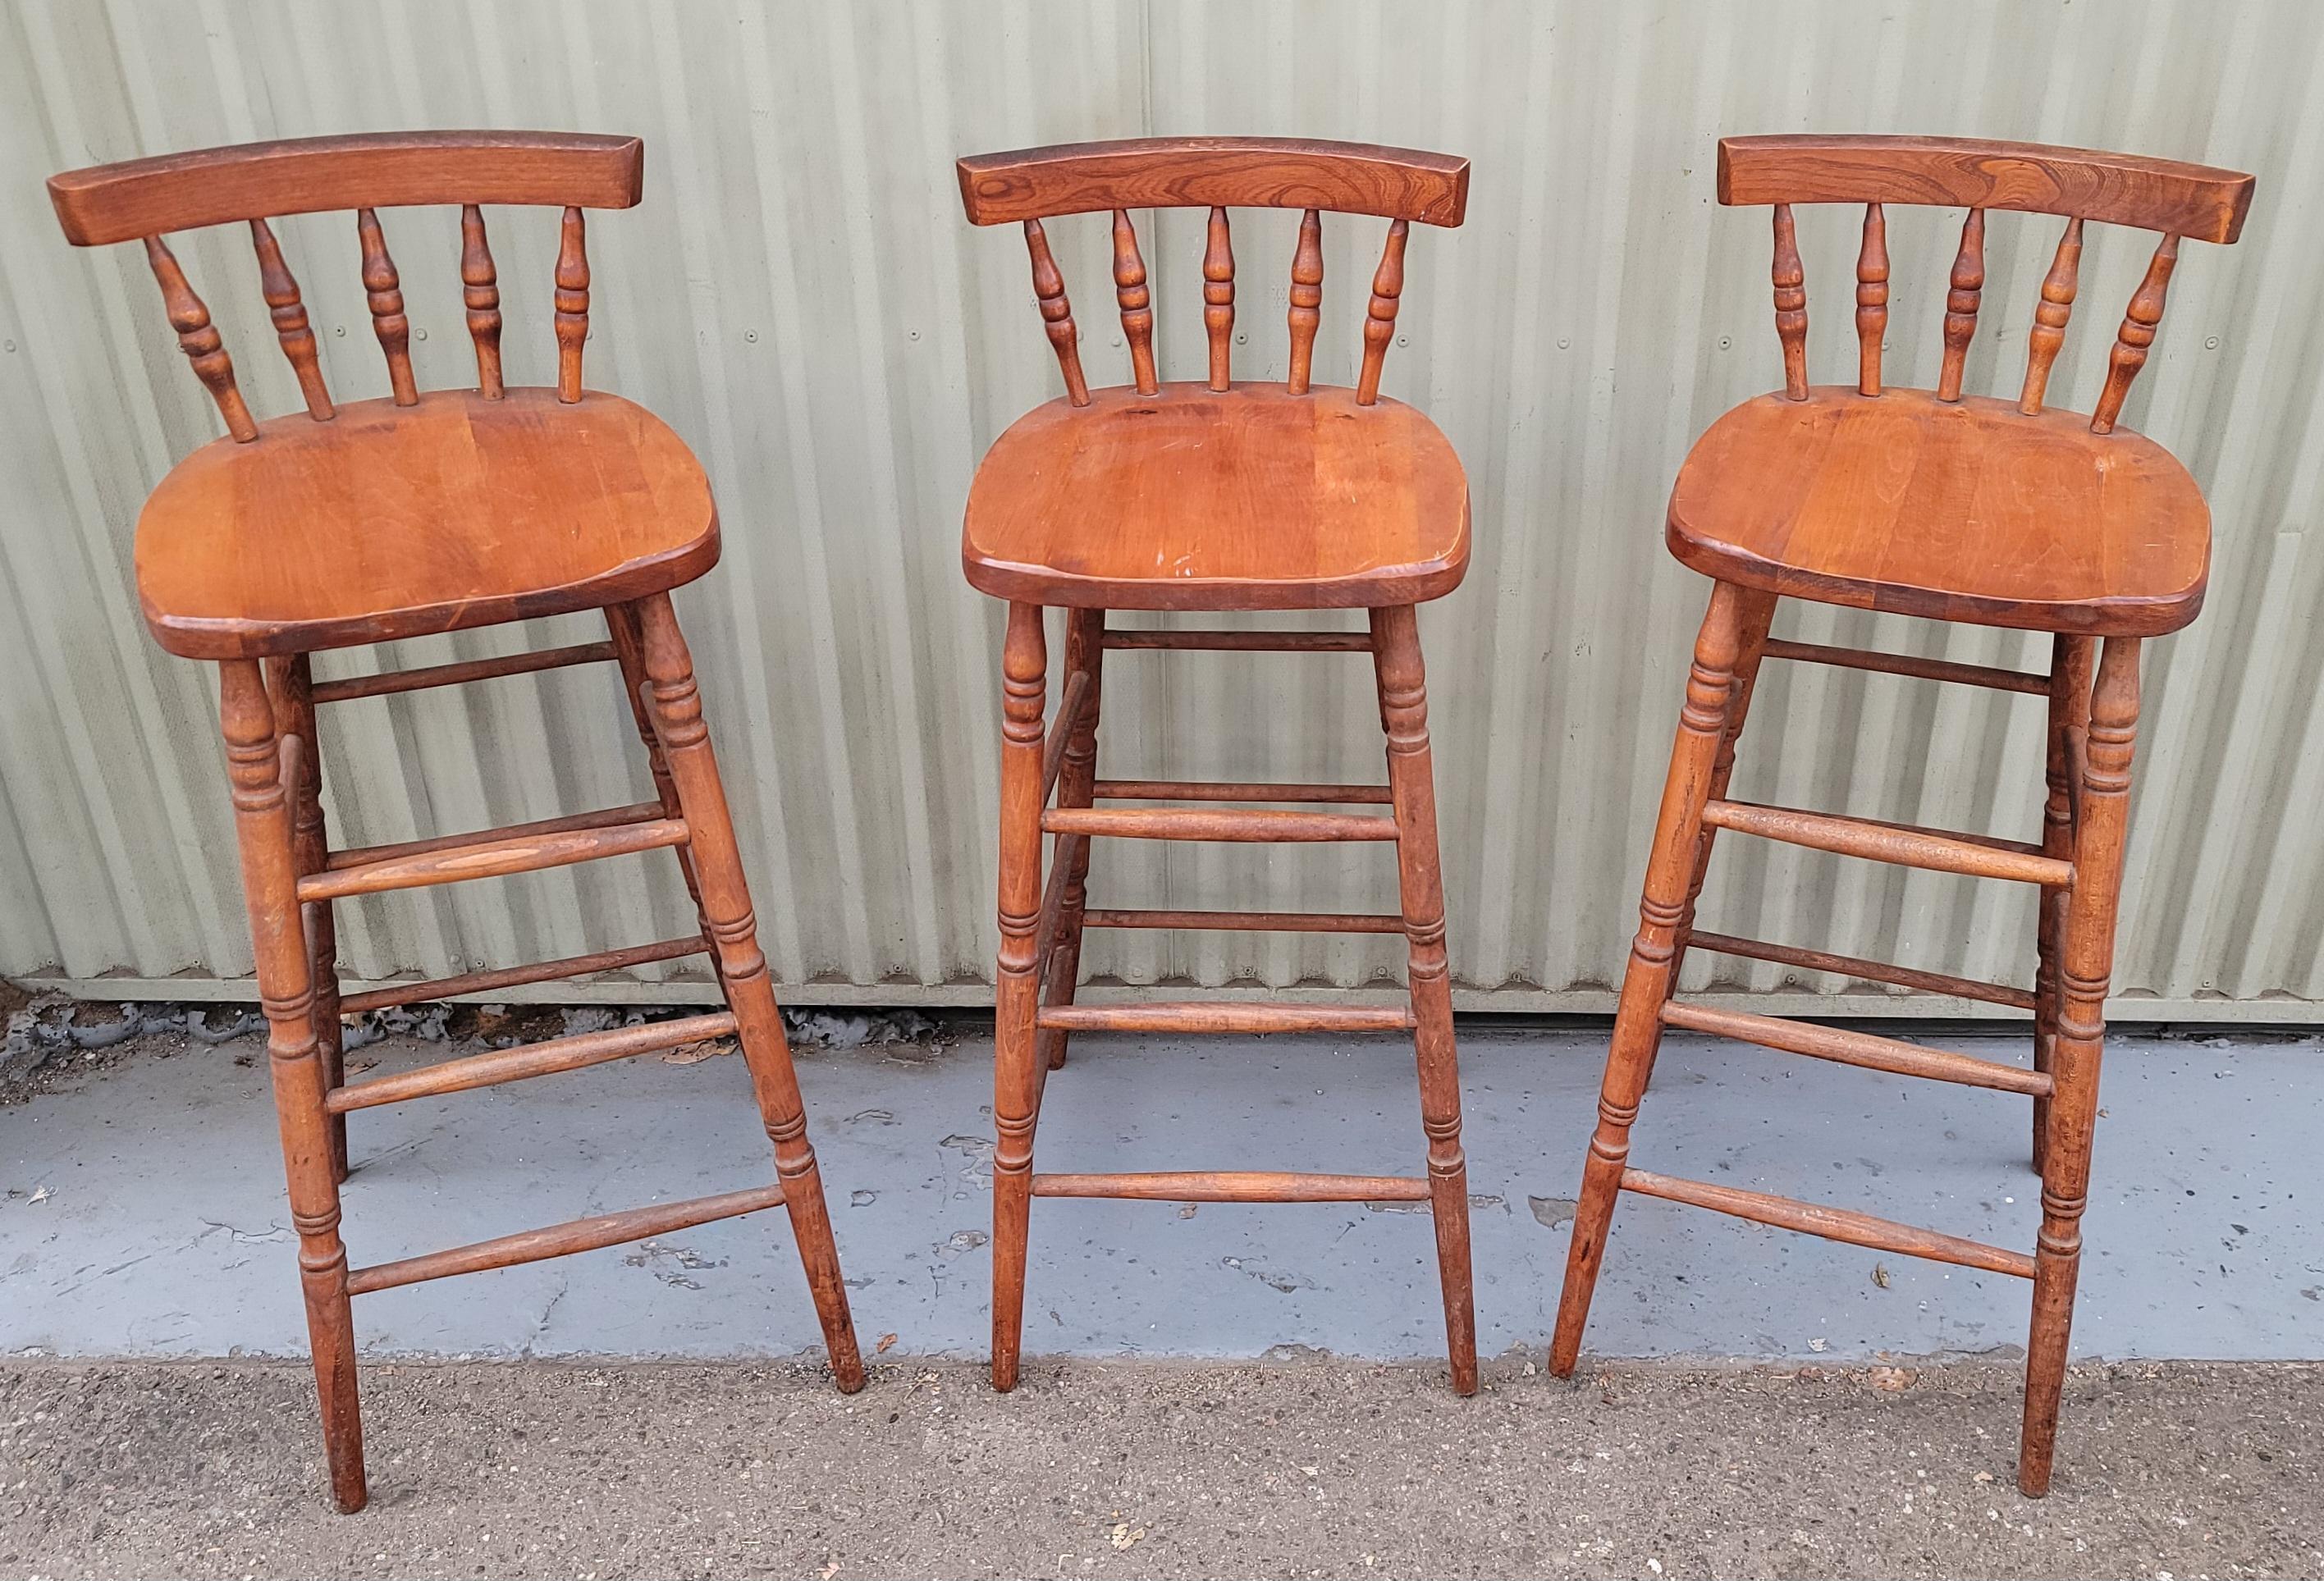 Set of four matching high back bar stools with spindle backs. The construction is very good and sturdy. Natural patina.